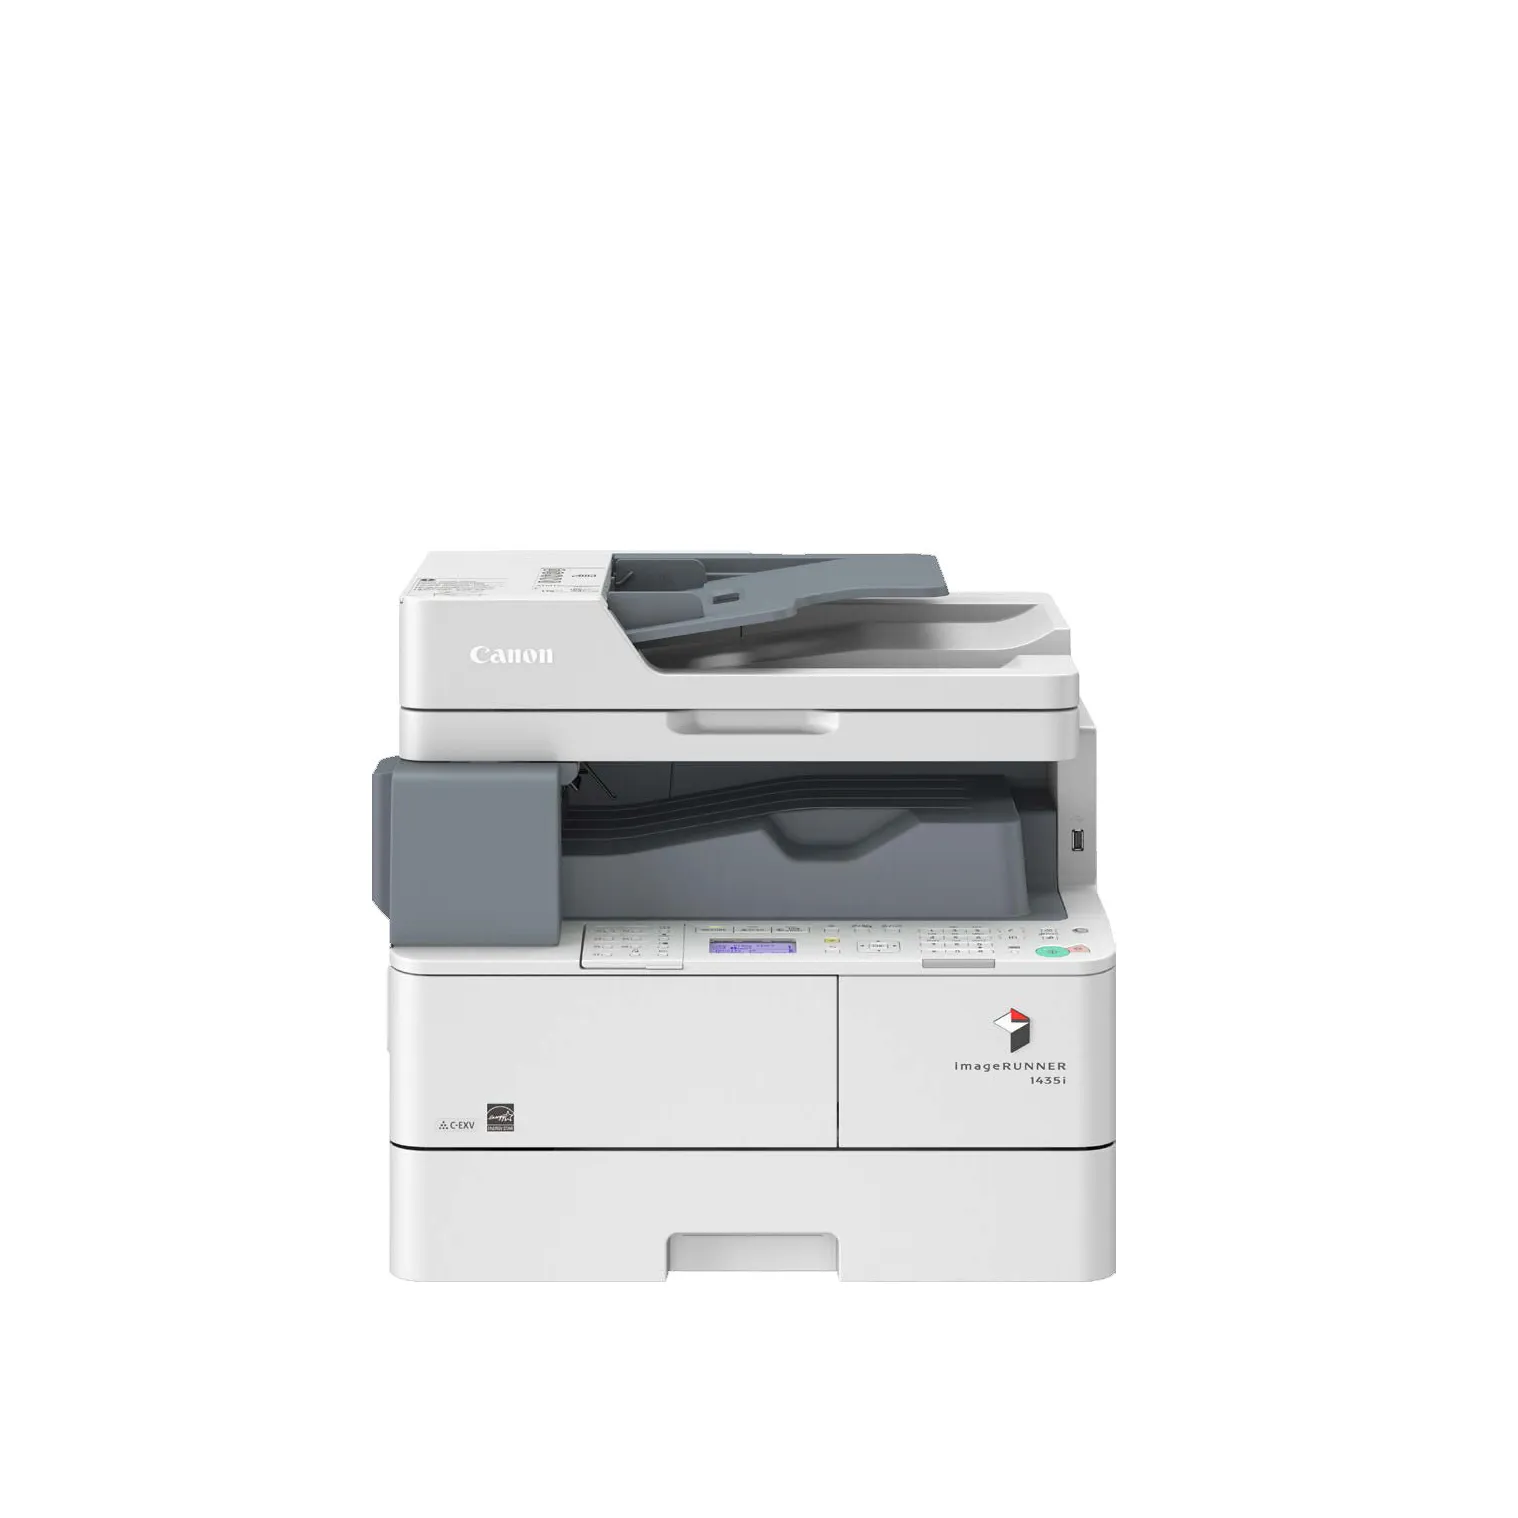   imageRUNNER C1325iF Color 9577B004